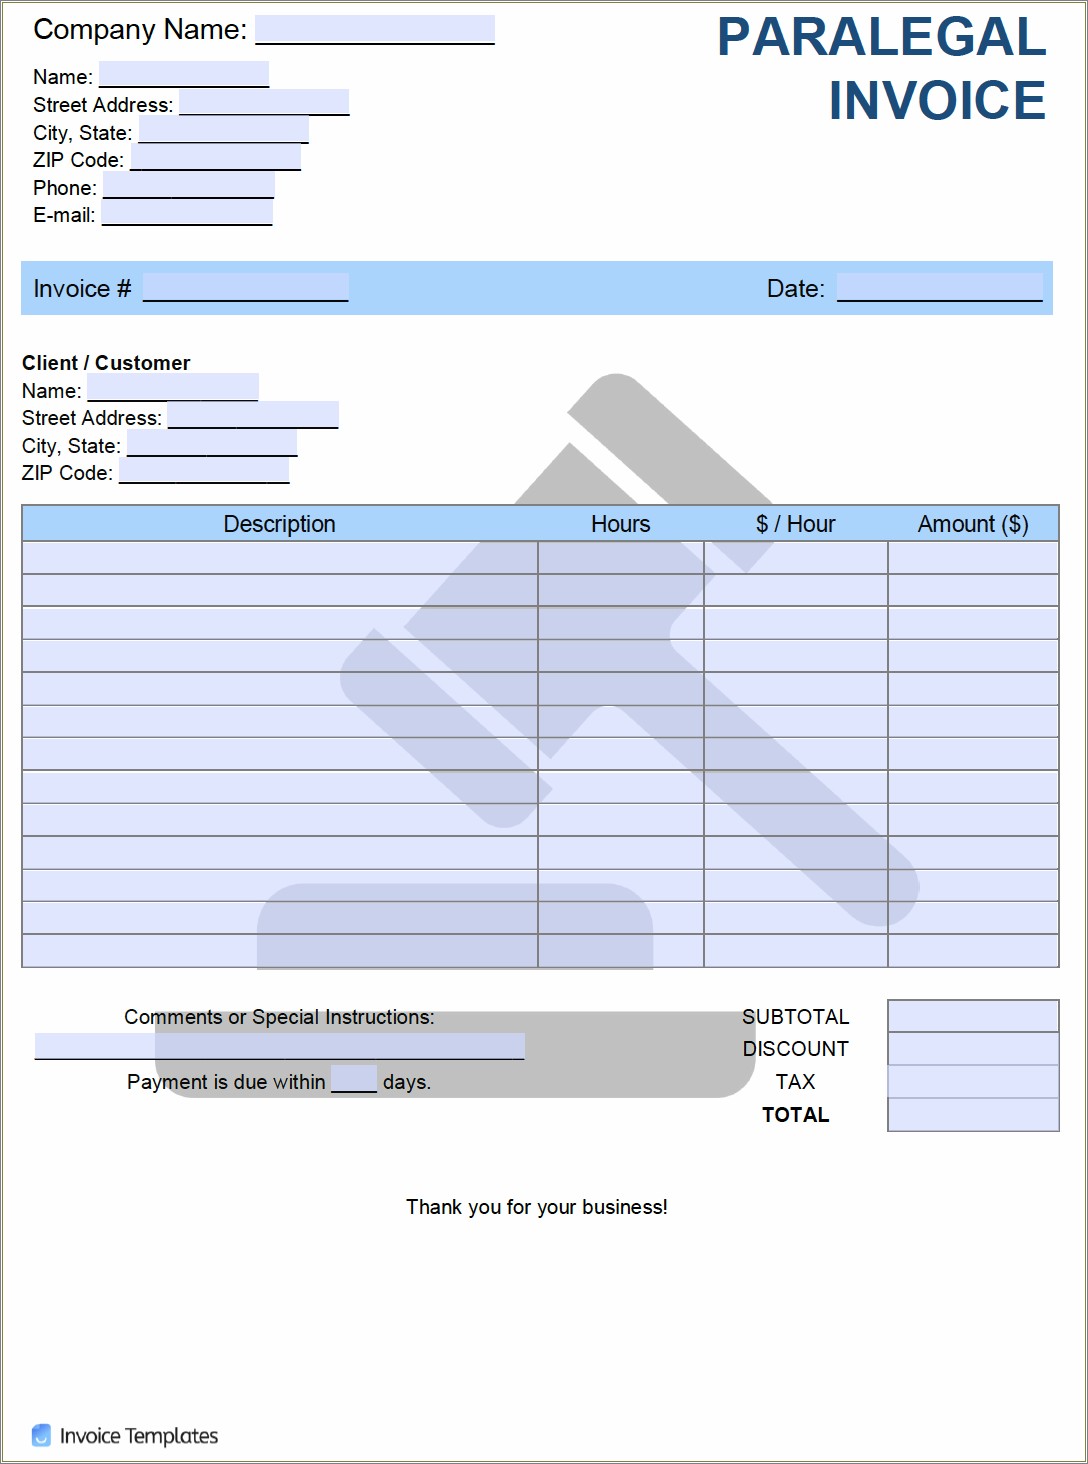 Family Law Paralegal Billable Hours Template Free